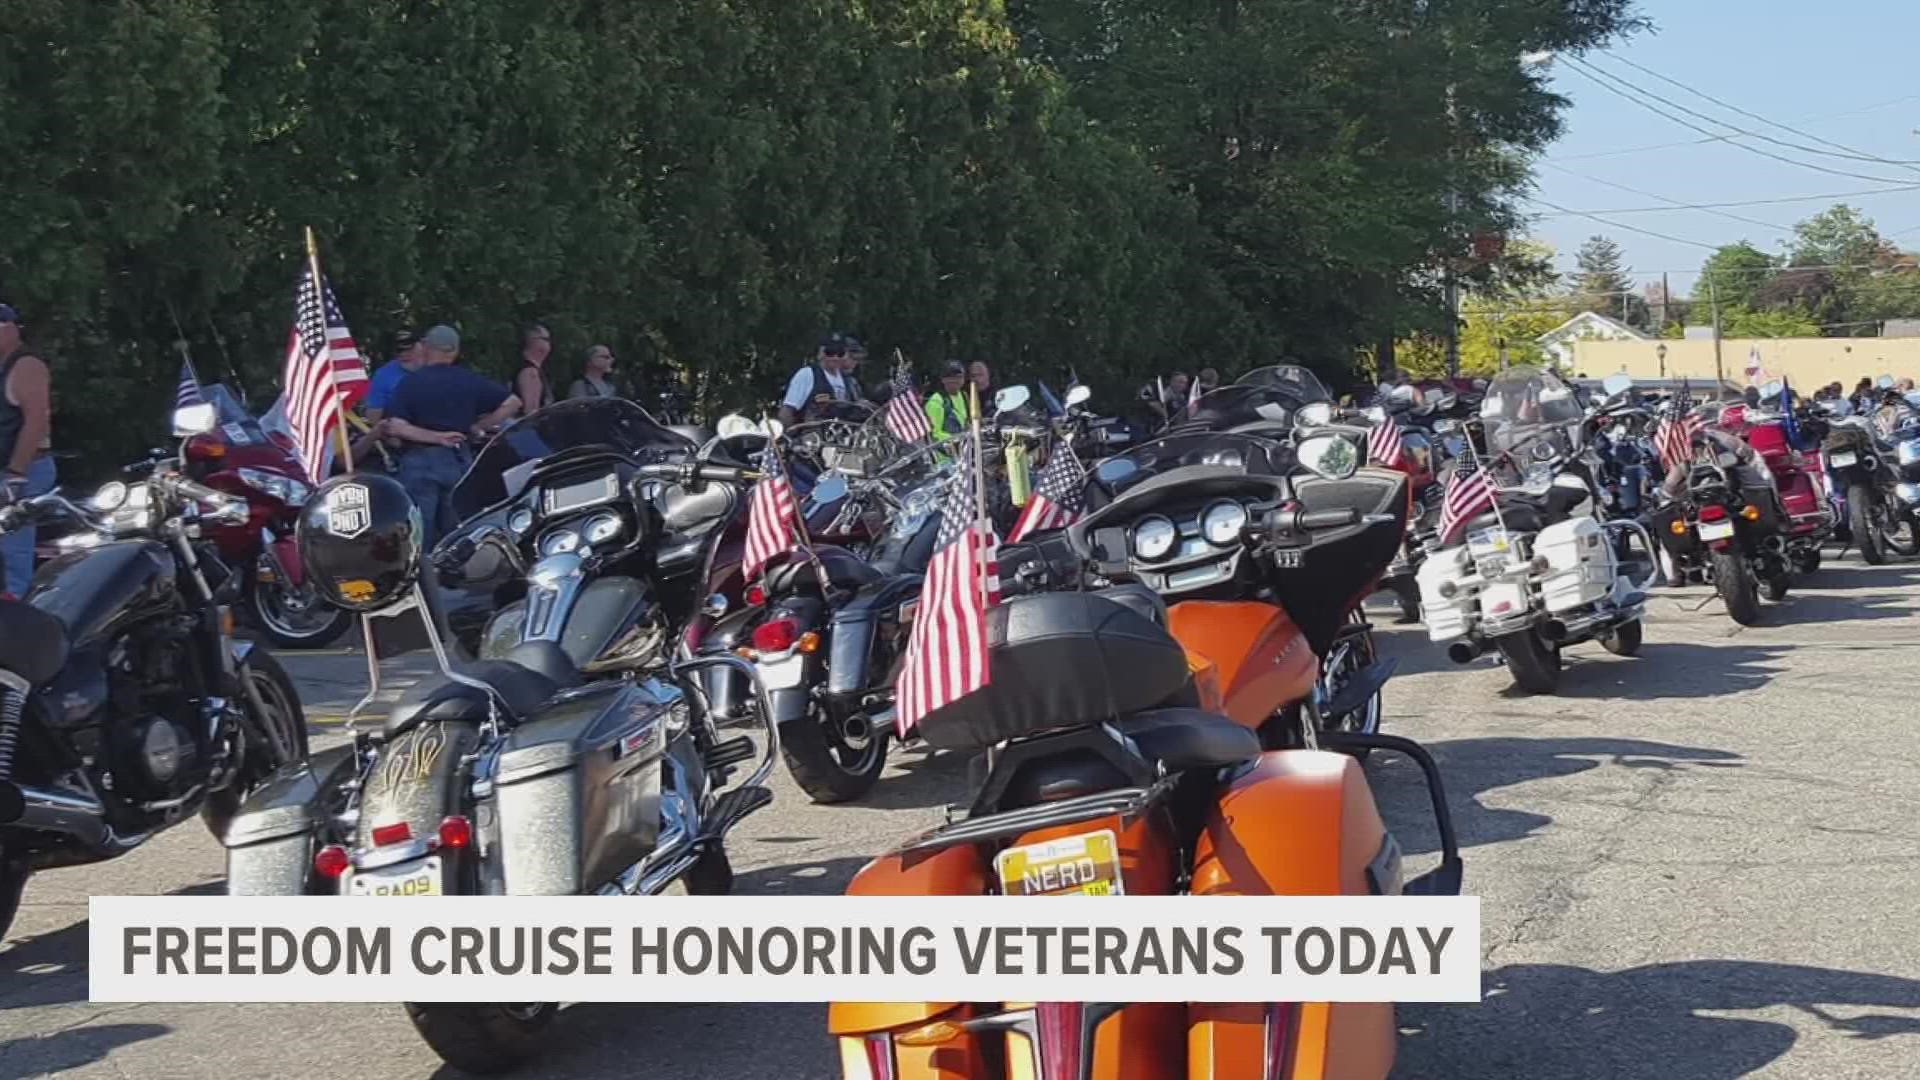 The event starts with a ceremony to honor a gold-star family, followed by an honor ride.